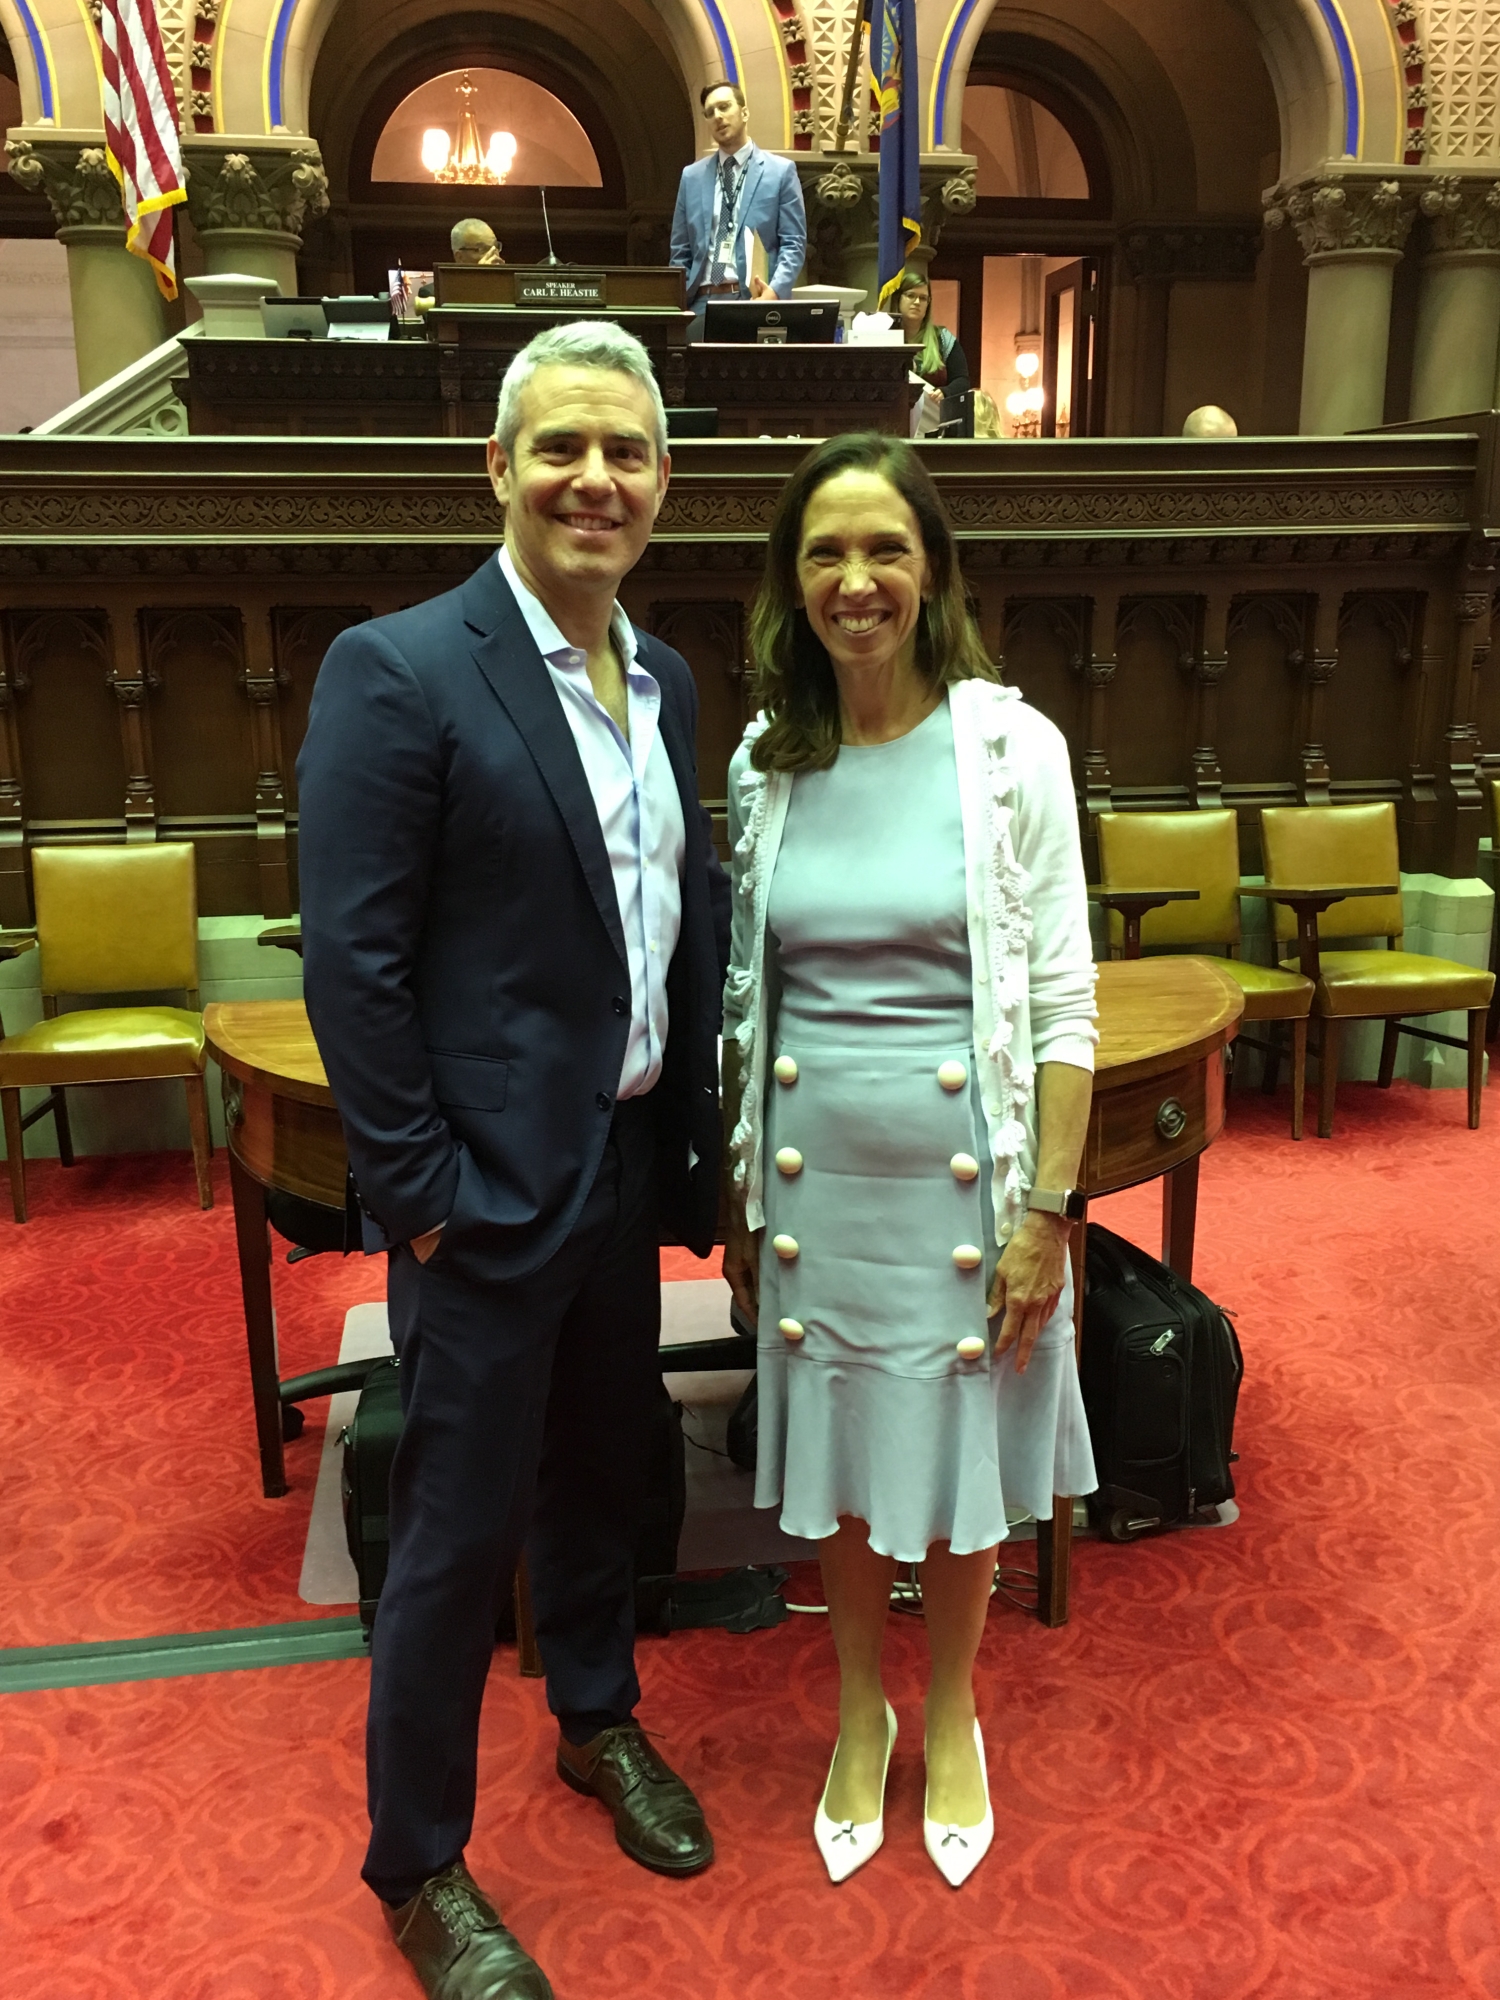 Amy Paulin meets with Bravo TV star Andy Cohen about his support for her bill, the Child Parent Security Act.